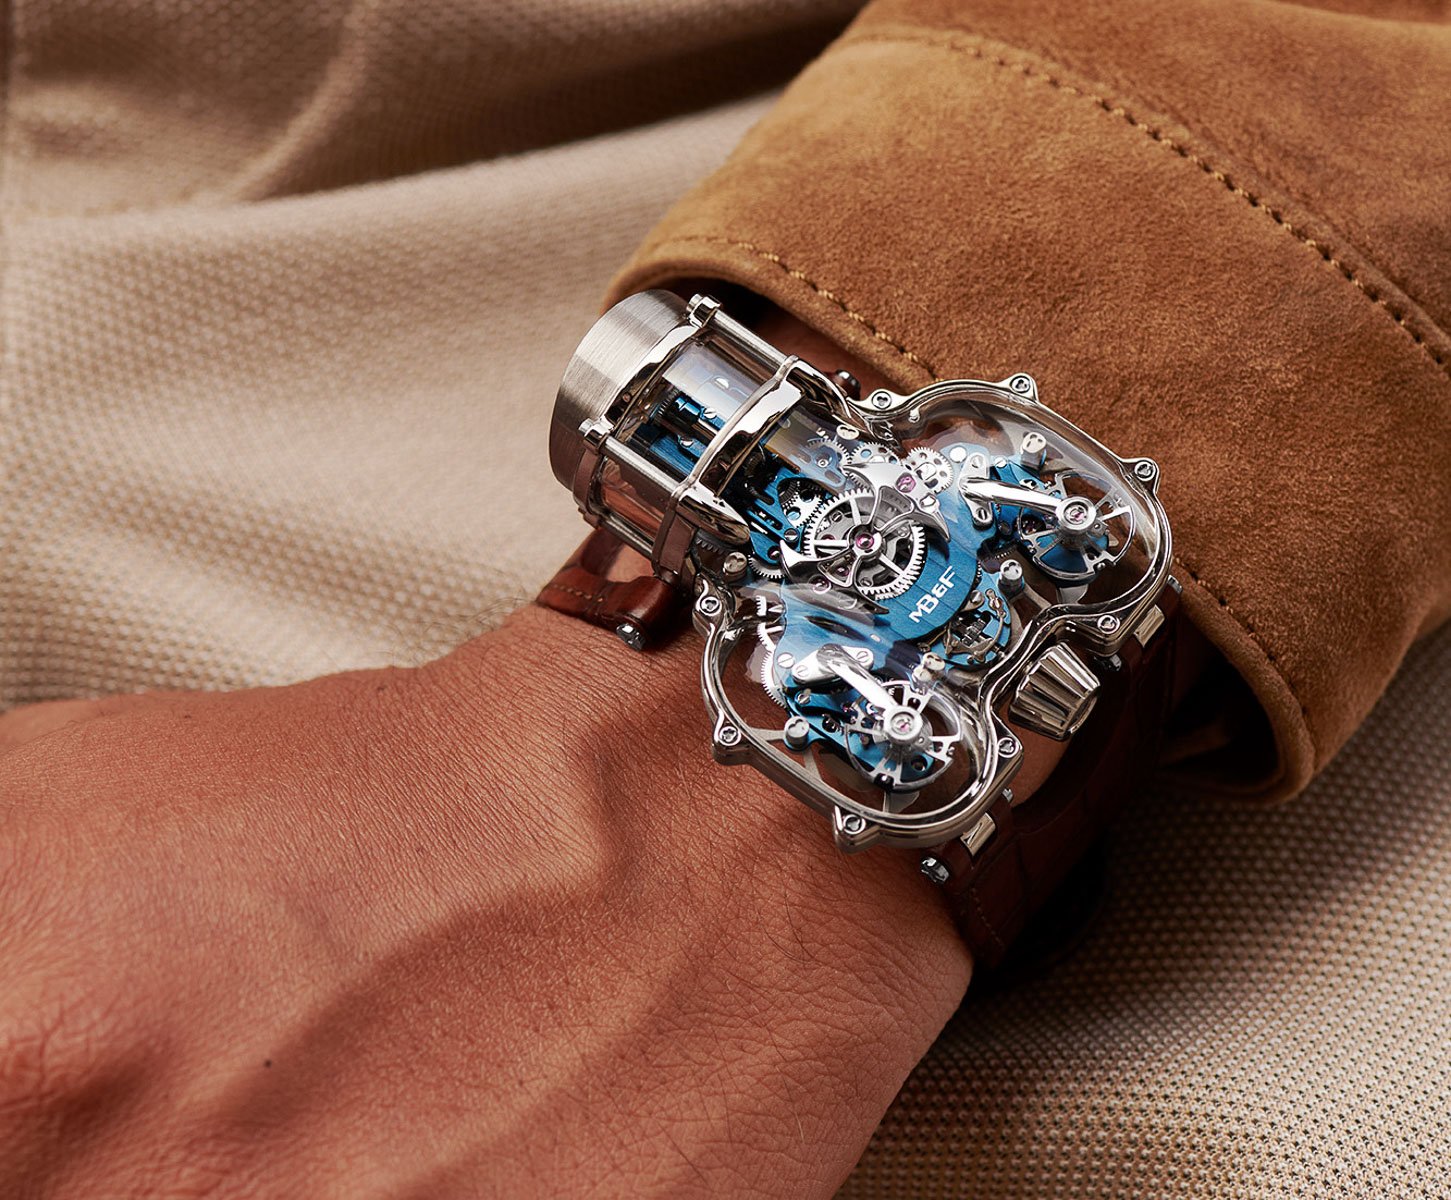 <div>Introducing Two New MB&F Horological Machine N°9 Sapphire Vision Editions</div>